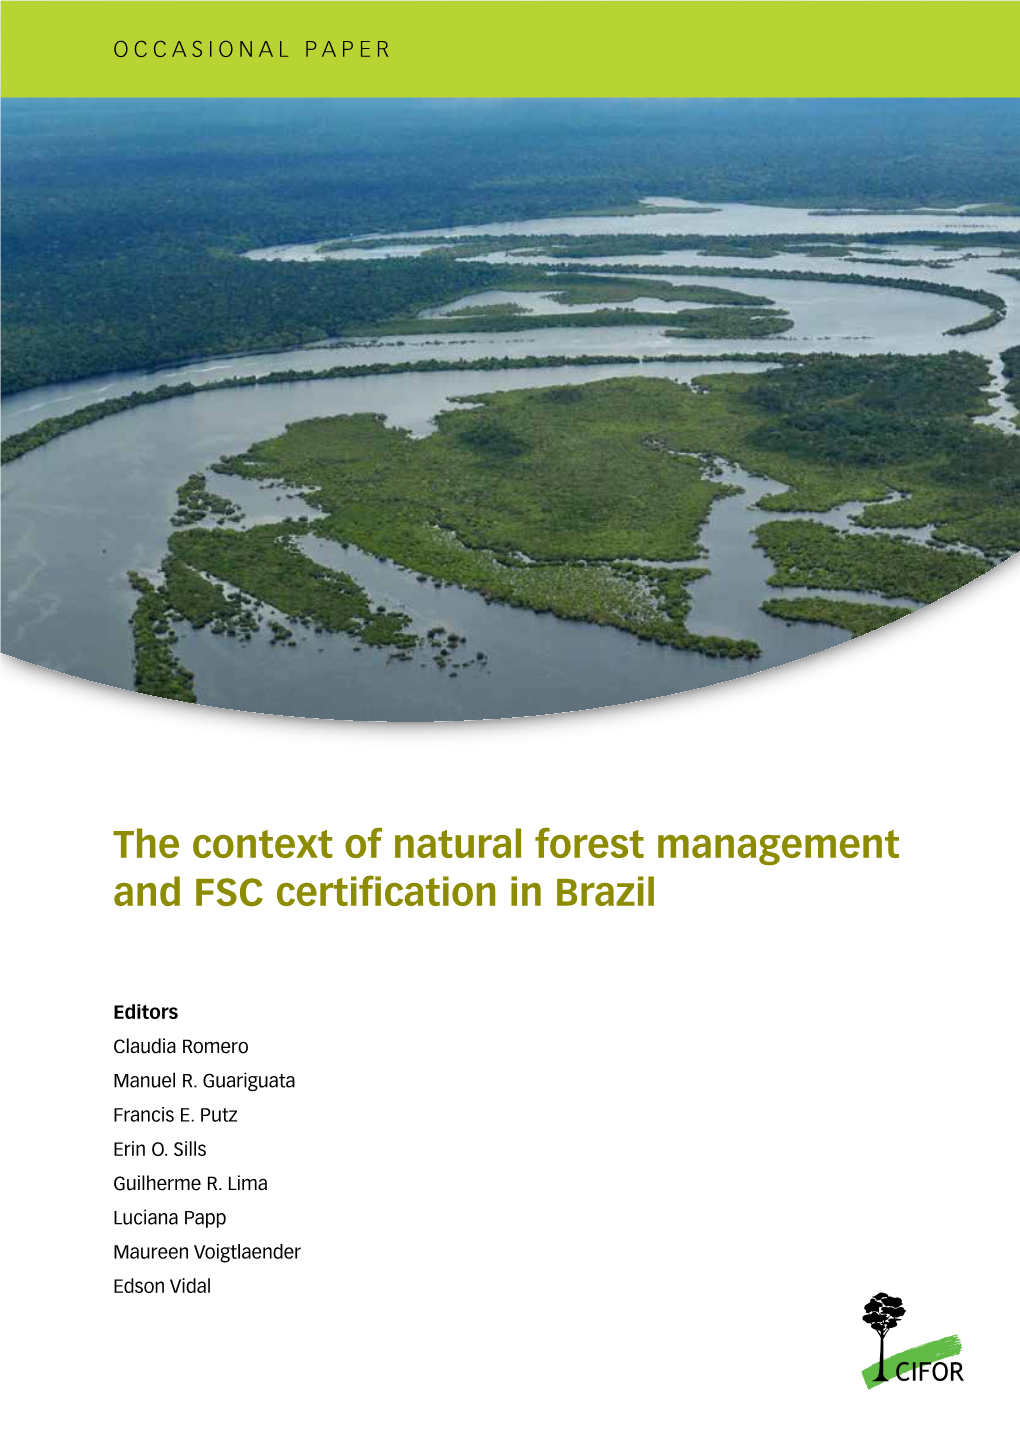 The Context of Natural Forest Management and FSC Certification in Brazil